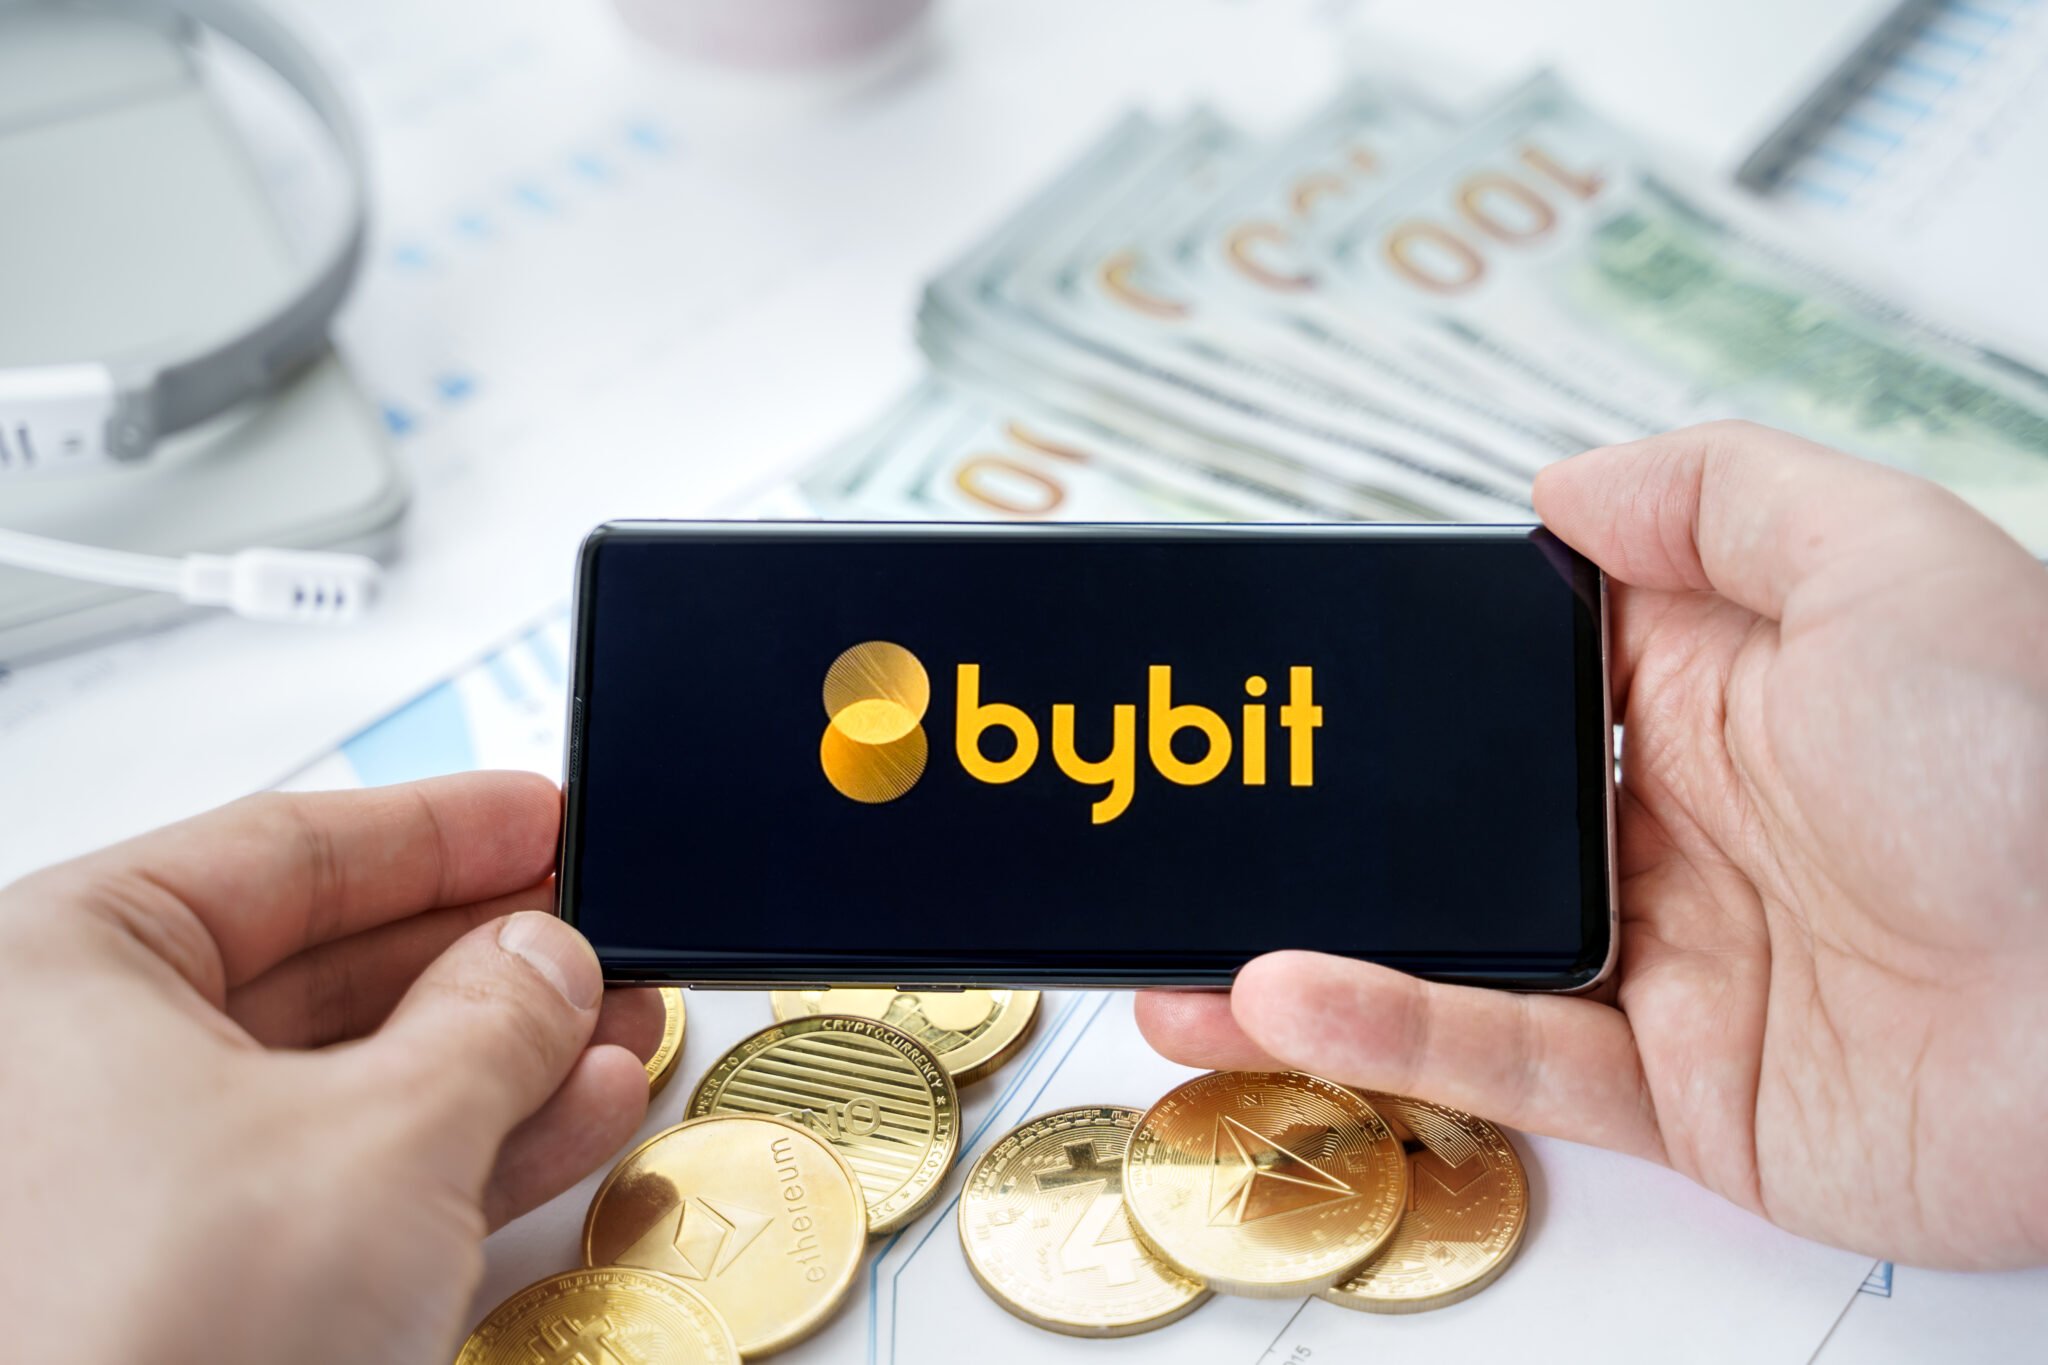 Russia Moscow 20.05.2021 Bybit logo in mobile phone.Cryptocurrency decentralized exchange DEX.Trading blockchain platform.Swap,buy,sell crypto token,digital coin Bitcoin,Ethereum.Business,investing.